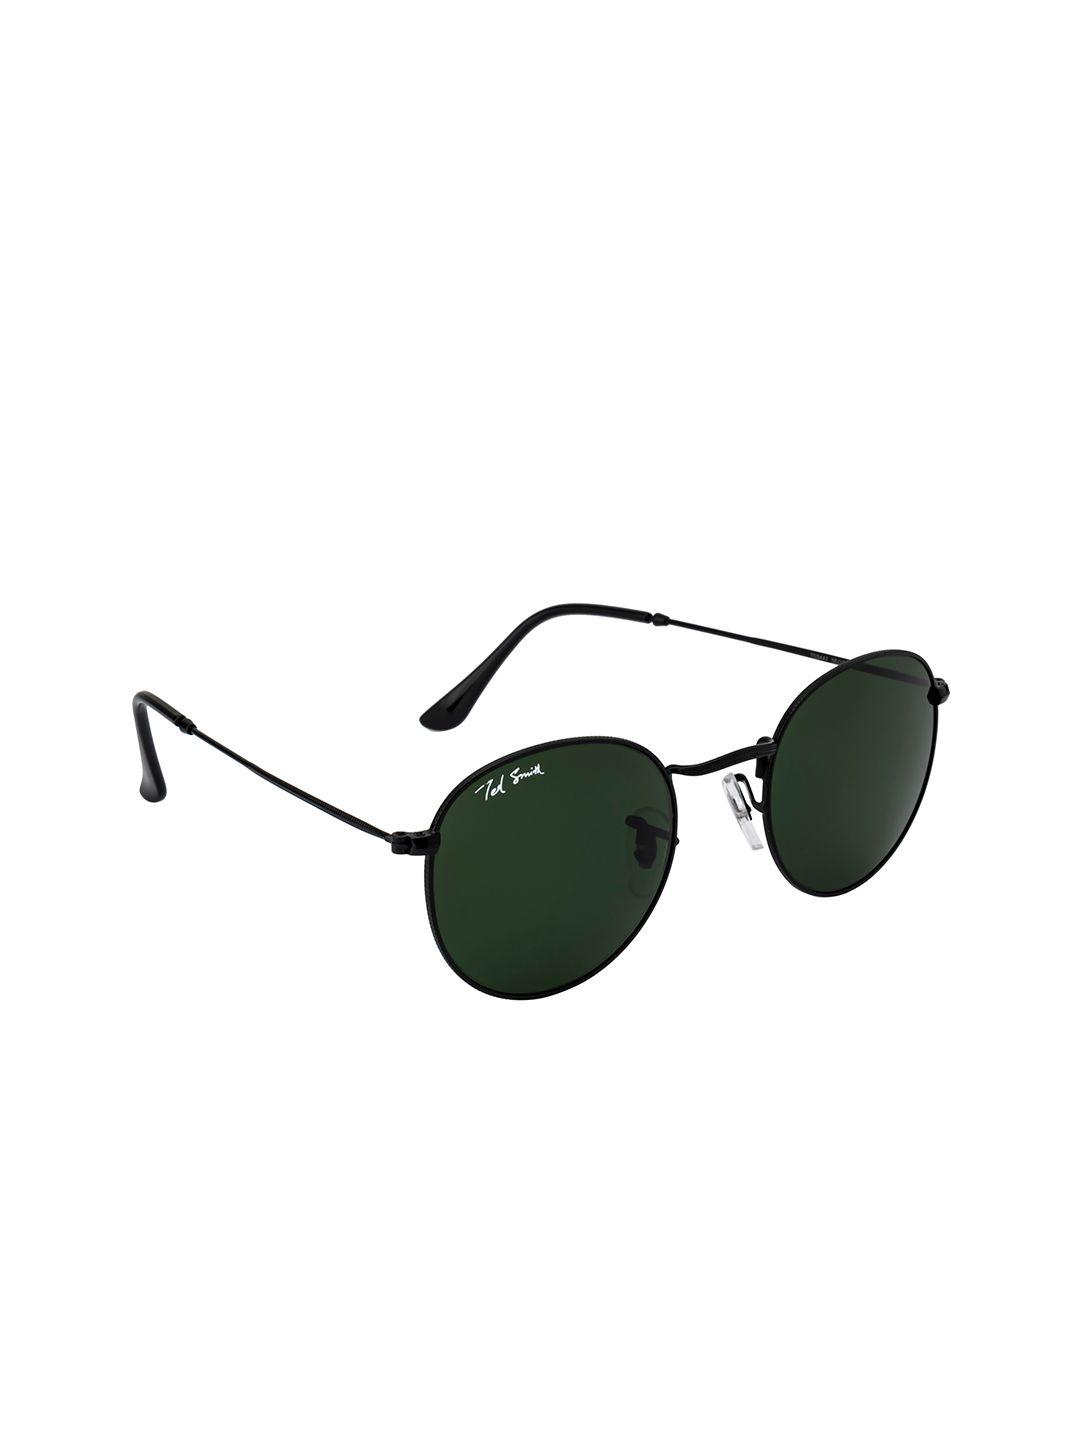 ted smith unisex green lens & black round sunglasses with uv protected lens - moon_c8